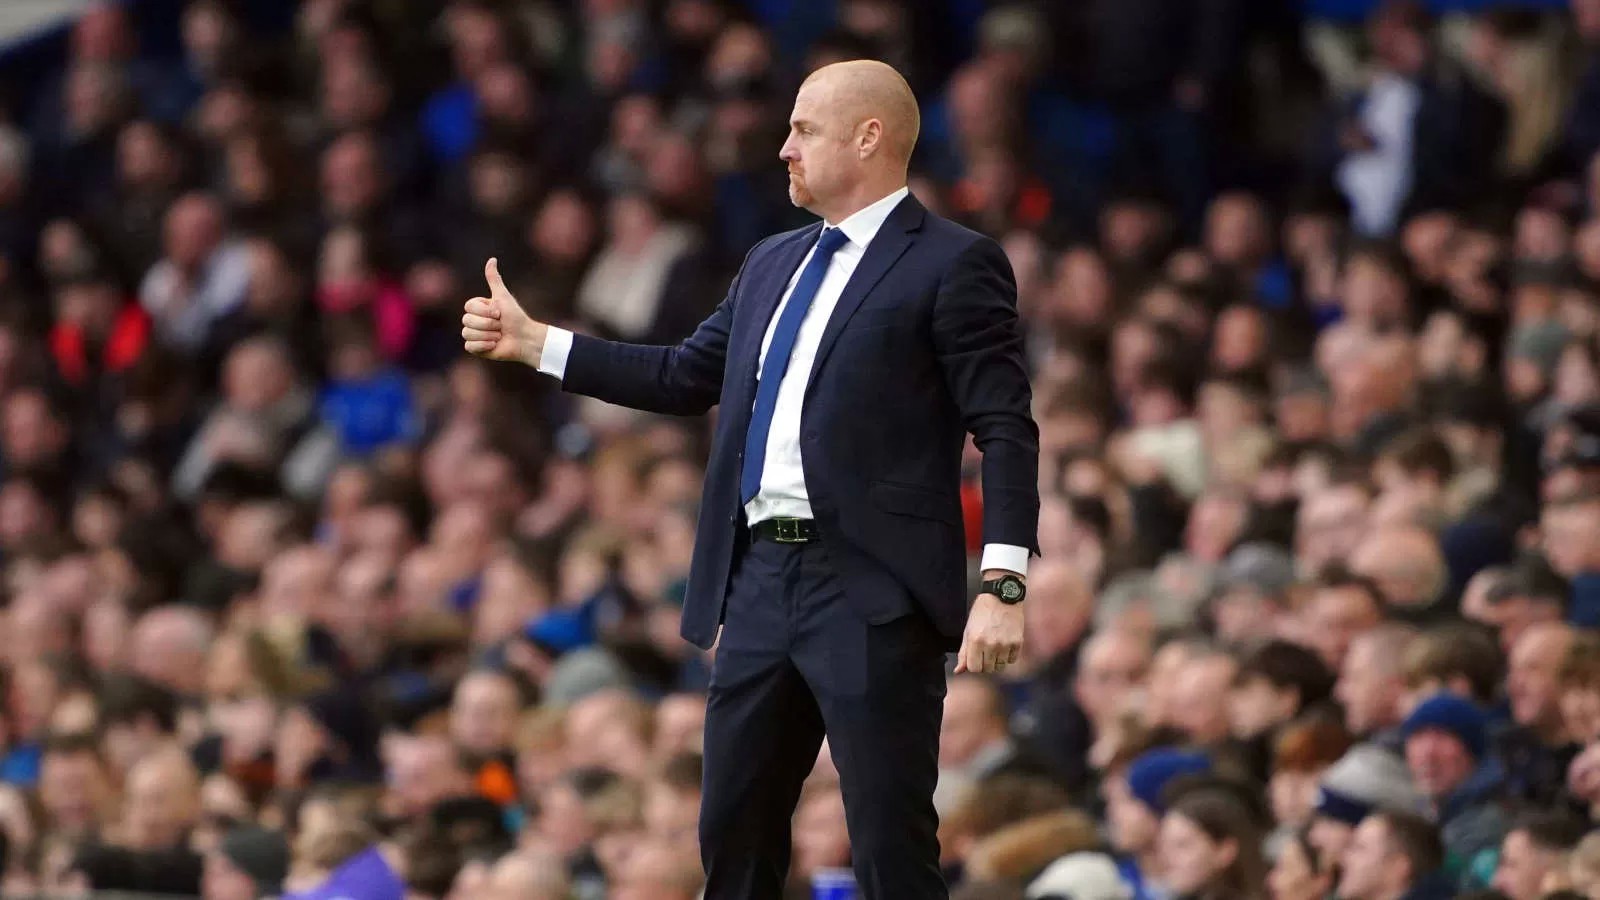 Everton roll back the years with a Dyche-ball masterclass against lacklustre Arsenal